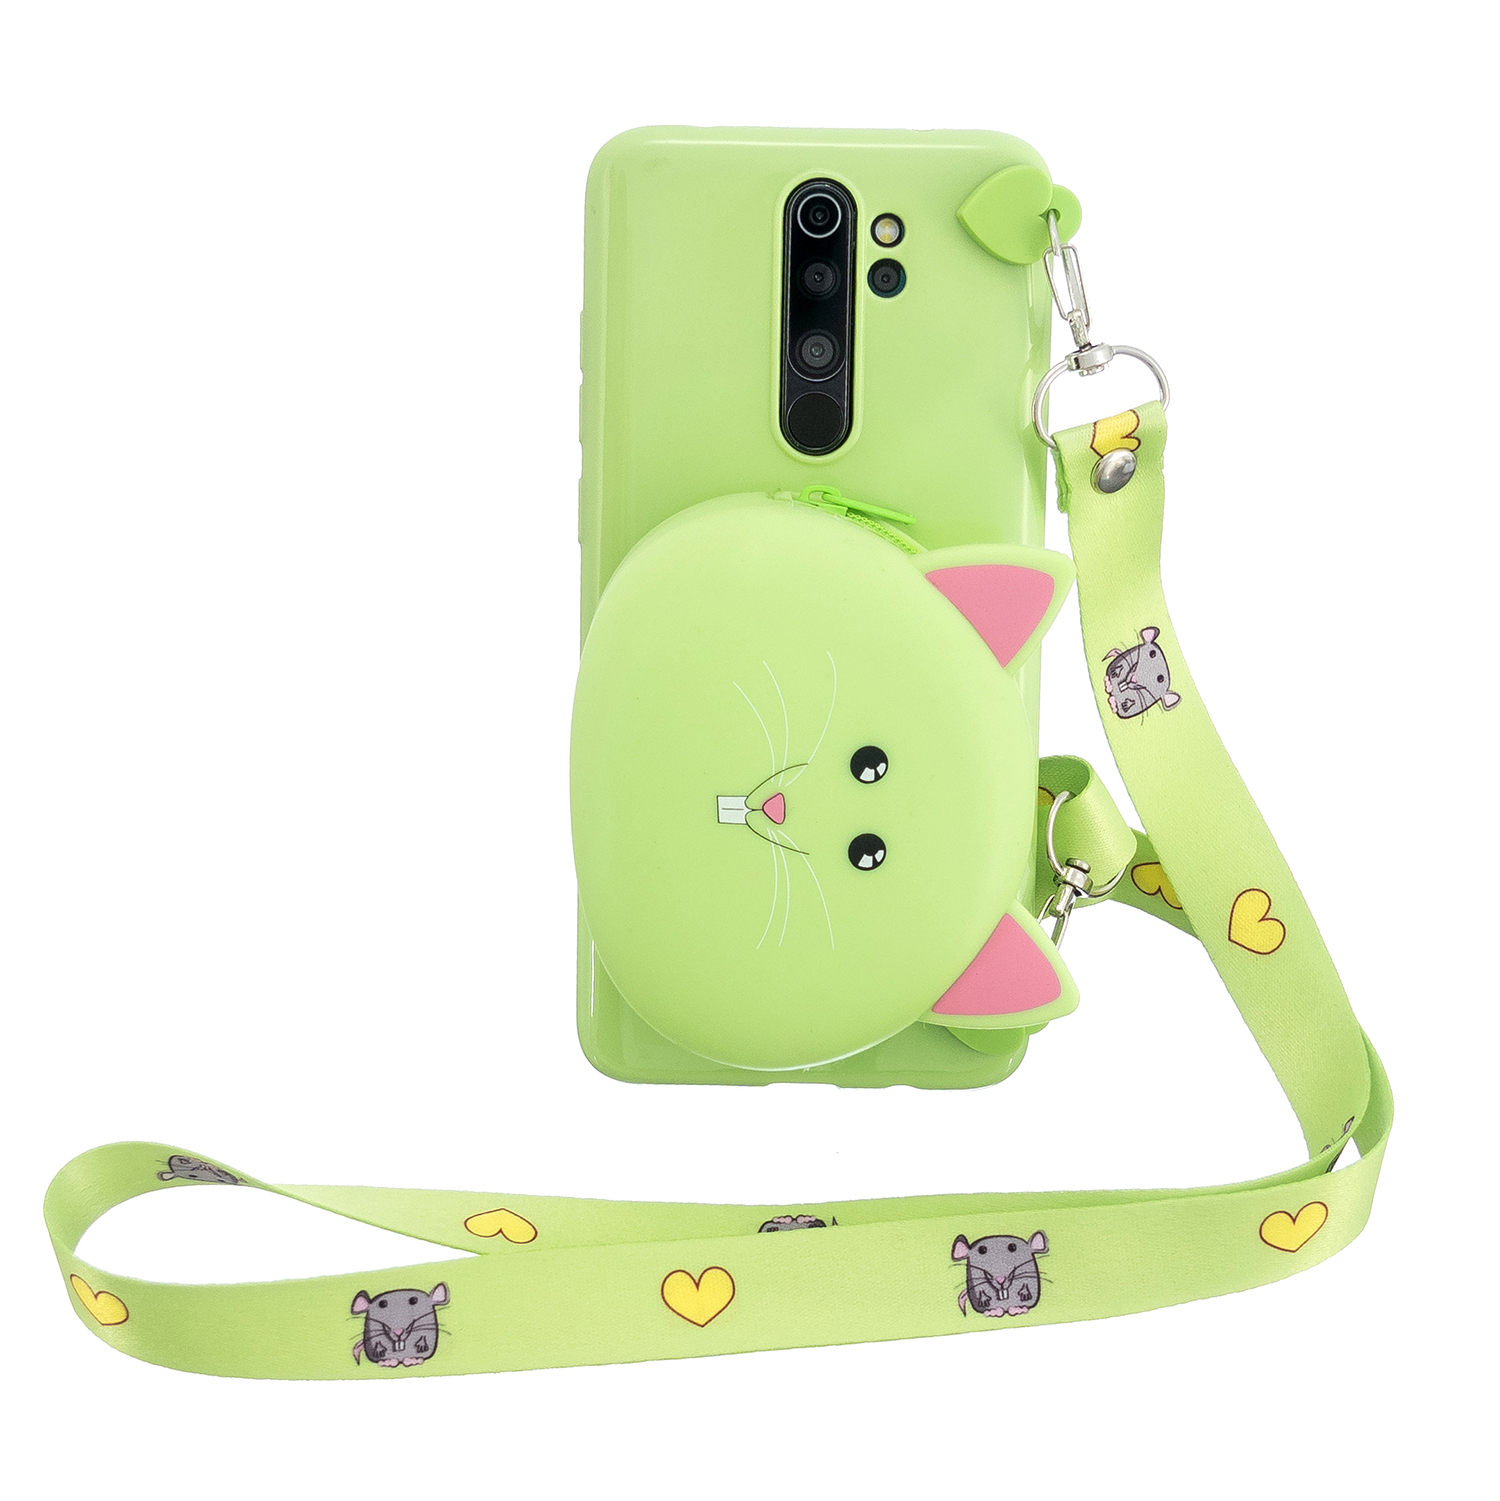 For Redmi Note 8/8T/8 Pro Cellphone Case Mobile Phone Shell Shockproof TPU Cover with Cartoon Cat Pig Panda Coin Purse Lovely Shoulder Starp  Green